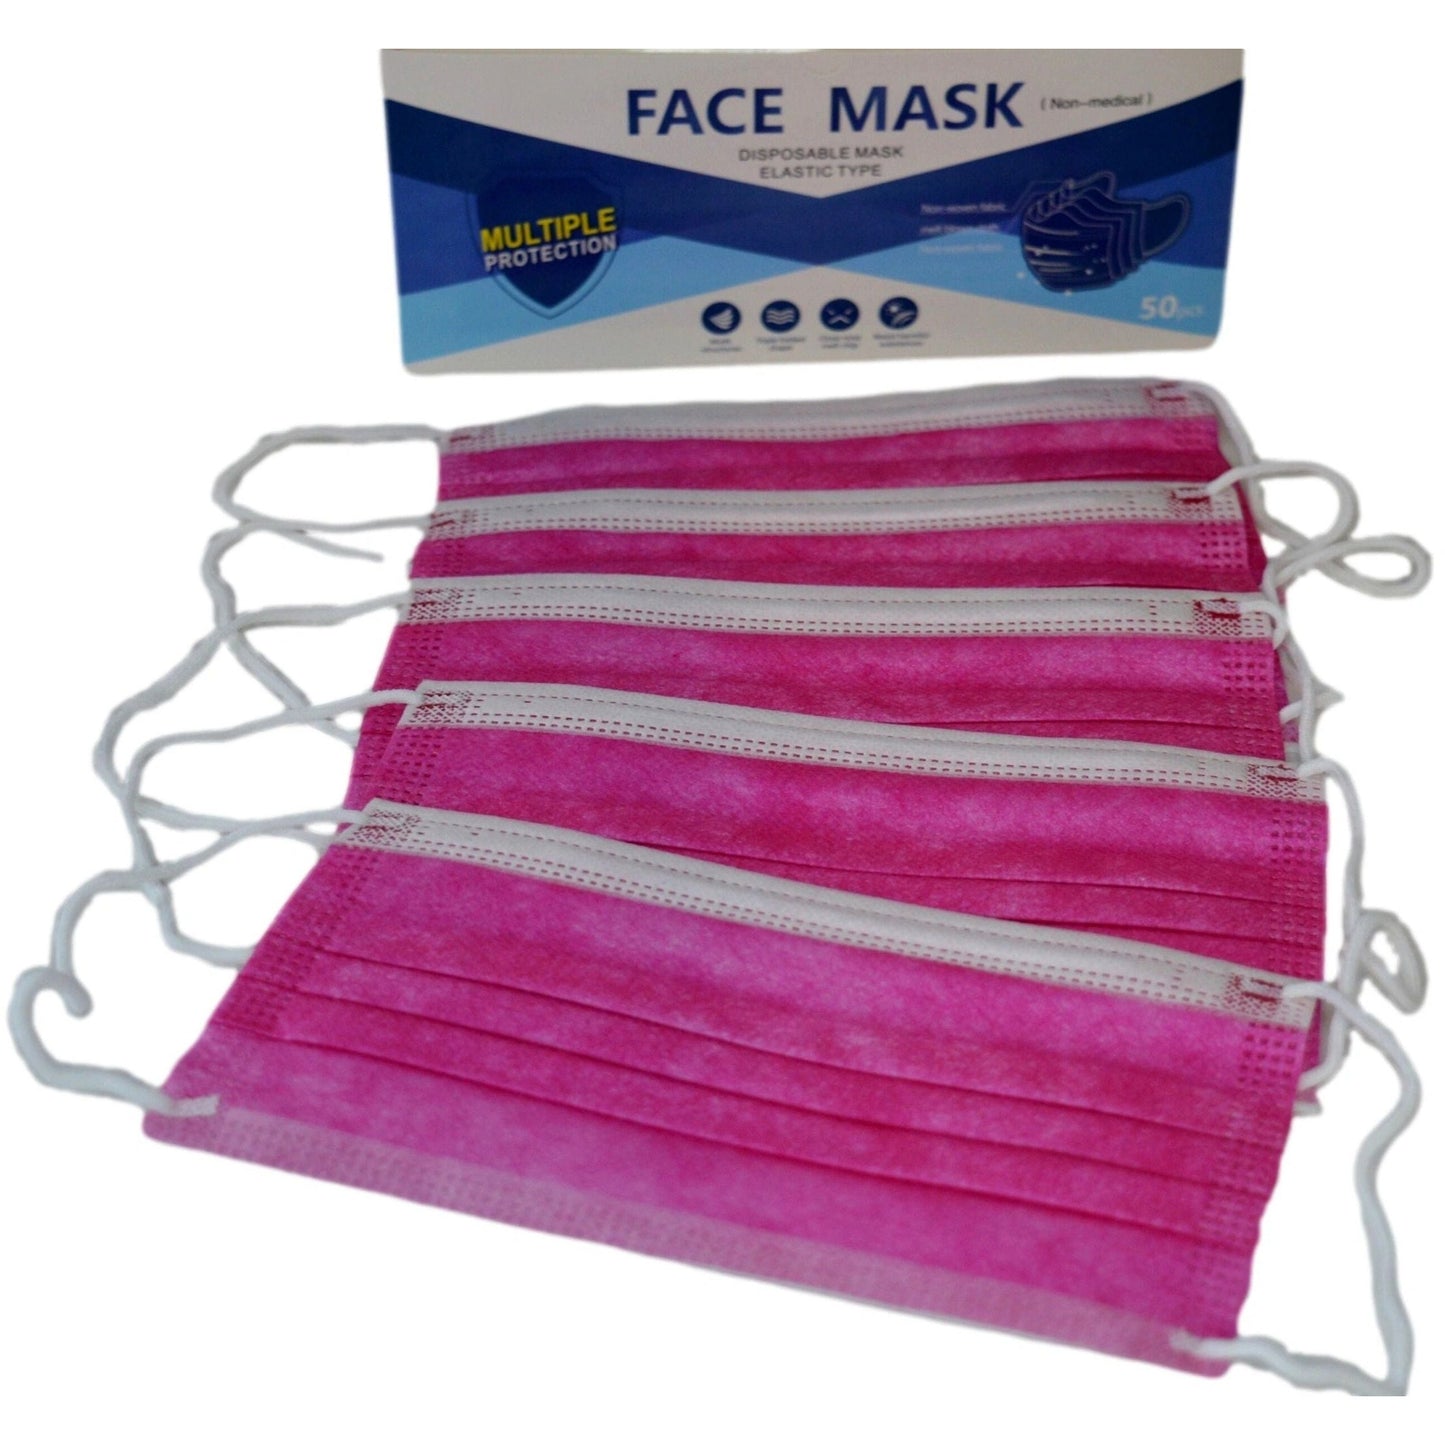 50 pieces - Adult Disposable Non-Medical Face Mask - 3 Ply